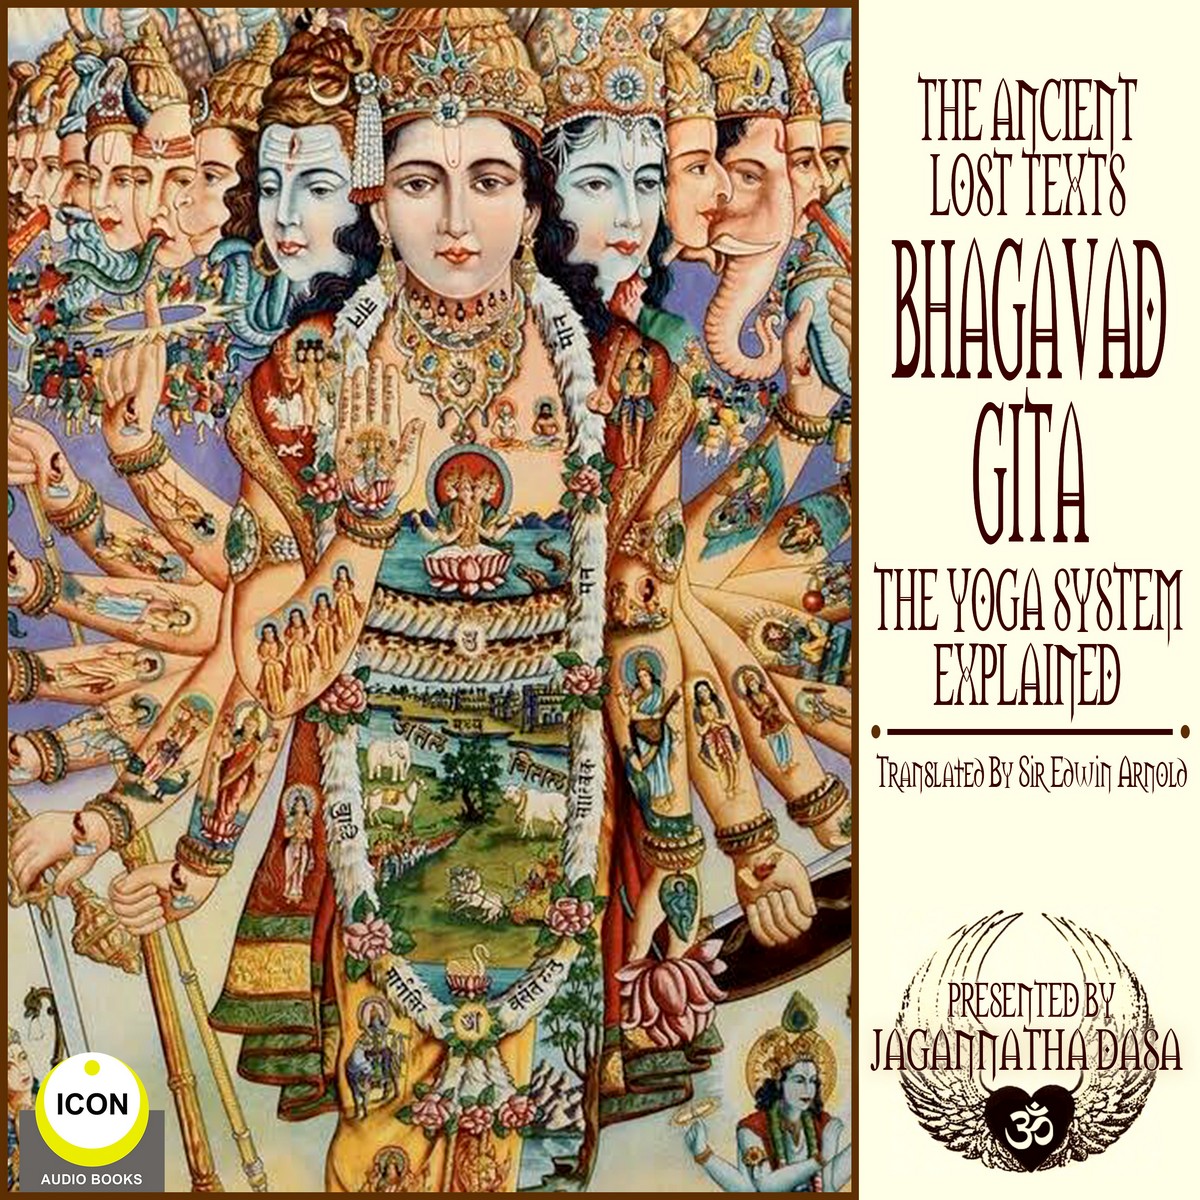 The Ancient Lost Texts The Bhagavad Gita – The Yoga System Explained